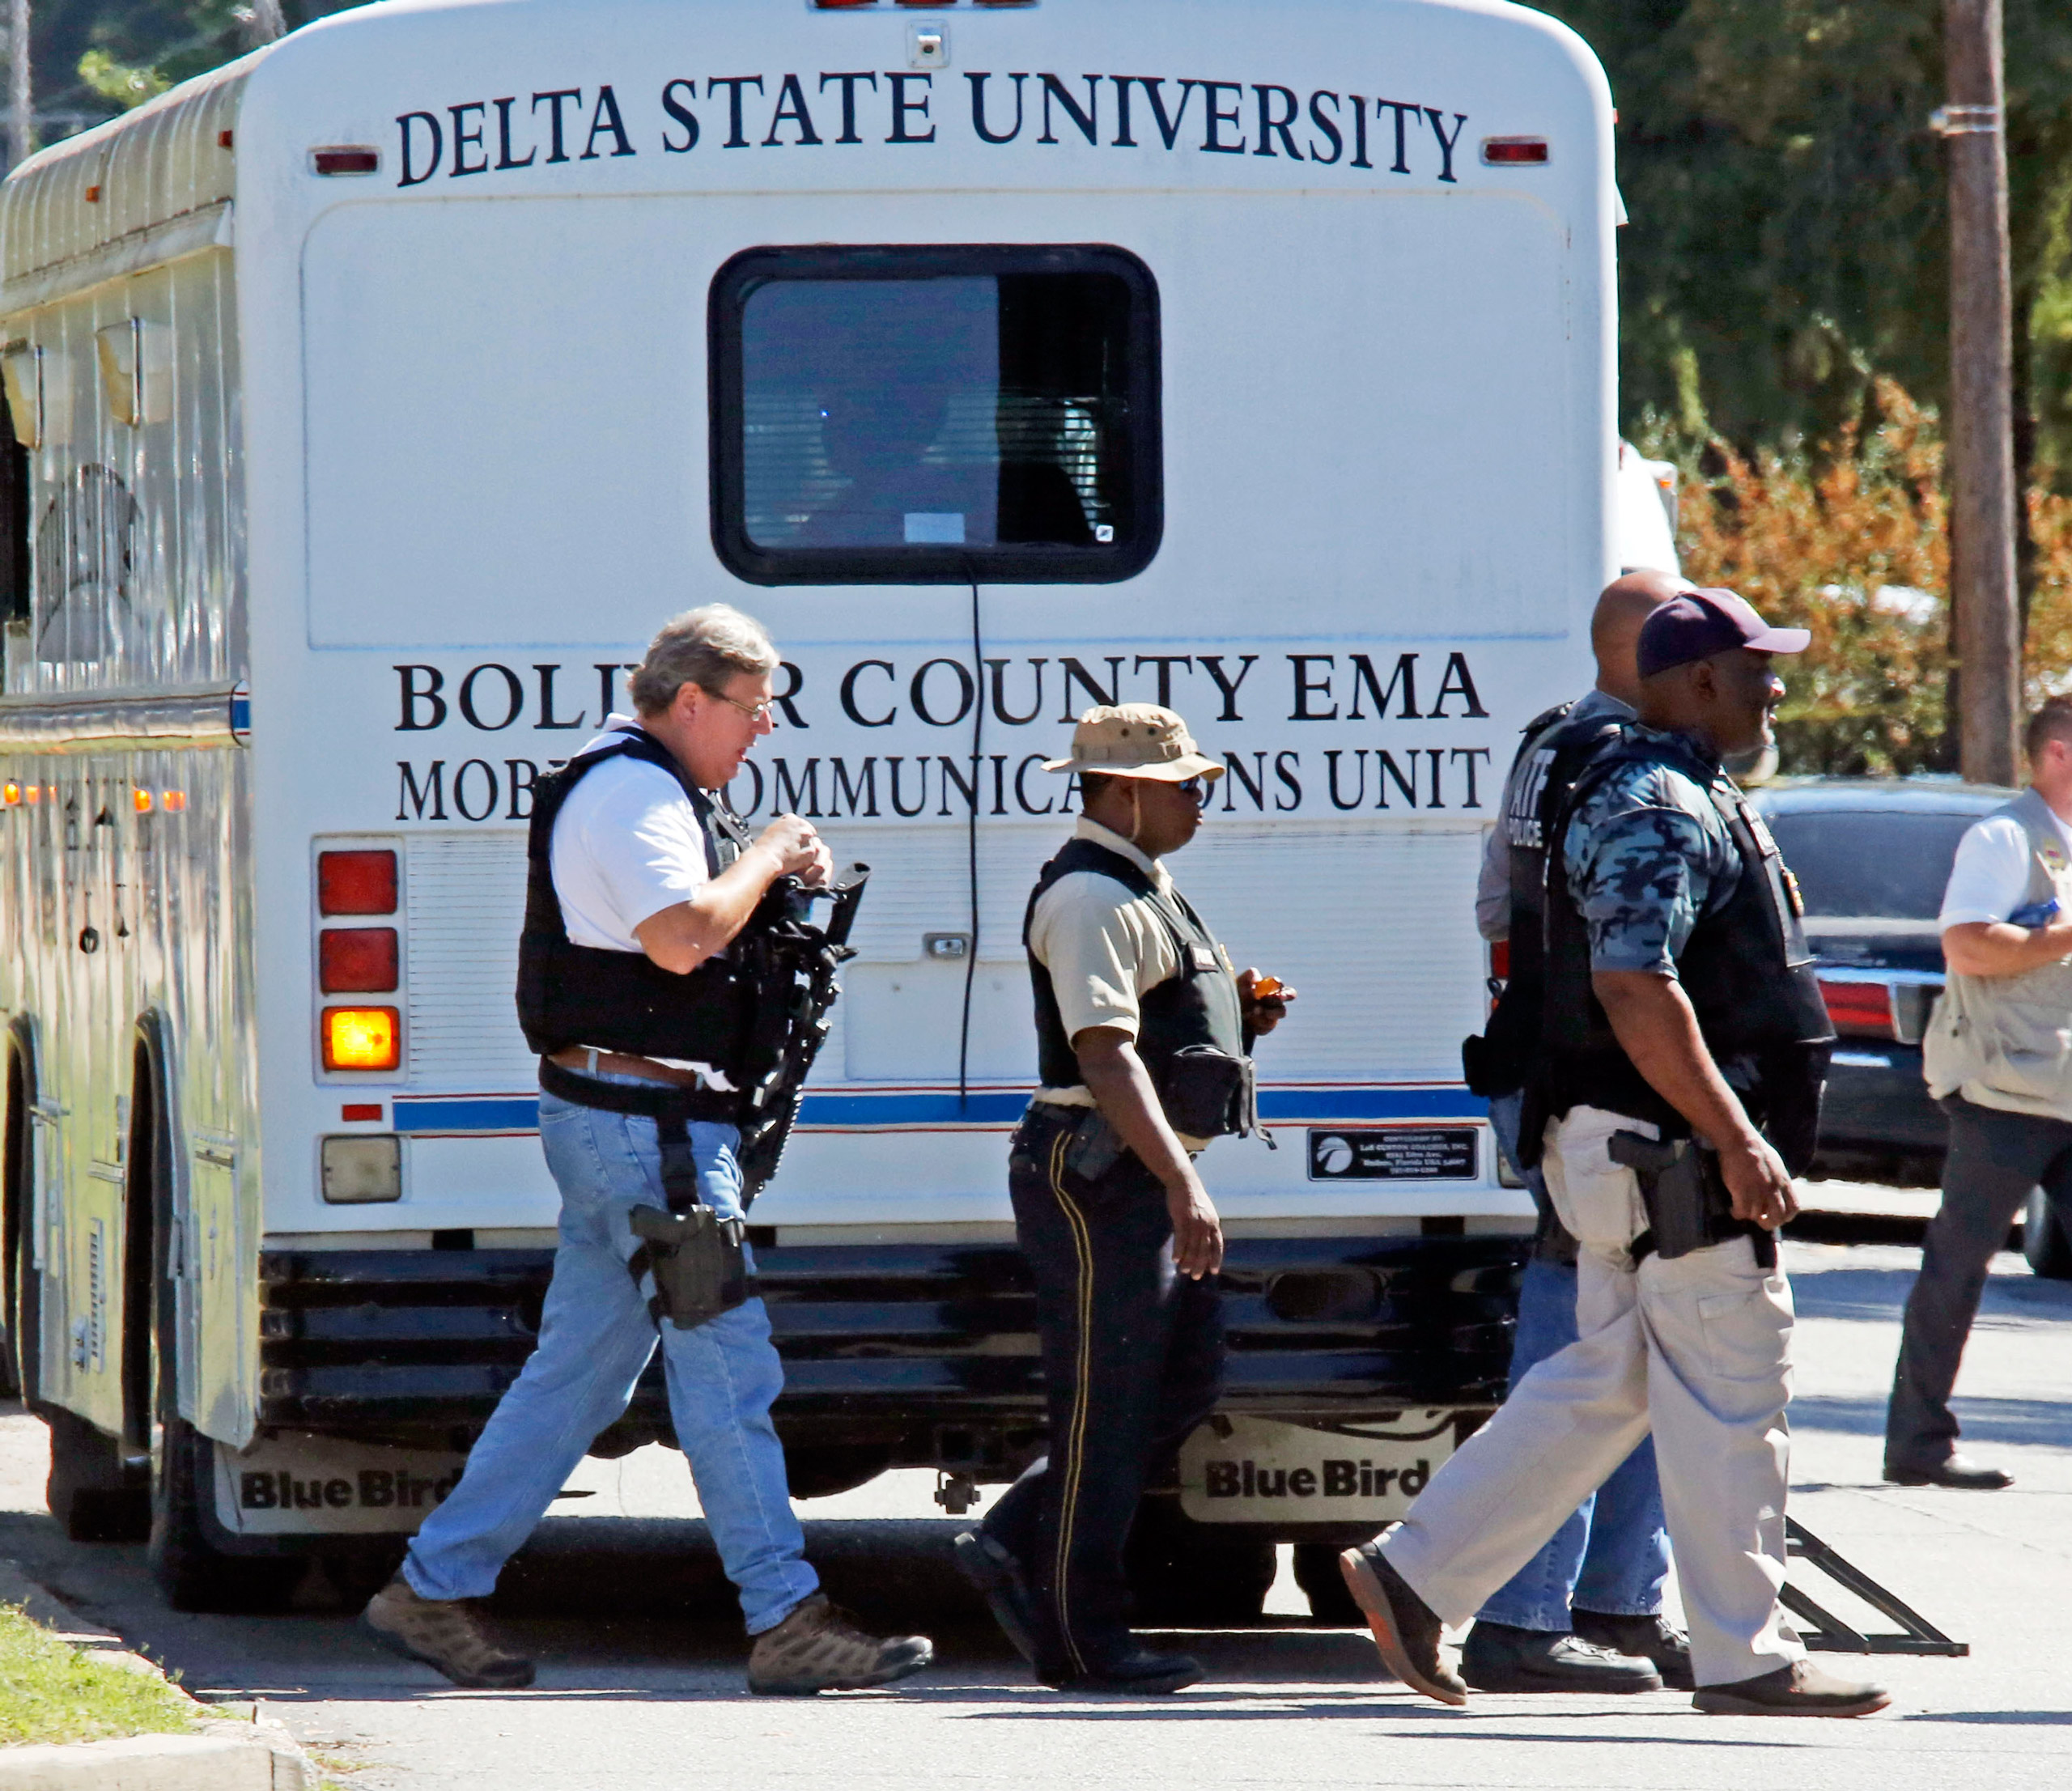 Law enforcement walk across the Delta State University campus to search for an active shooter in connection with a the shooting of history professor Ethan Schmidt in his office at Delta State University in Cleveland, Miss., Monday, Sept. 14, 2015. Law enforcement are looking for a another school employee in connection with the killing. (AP Photo/Rogelio V. Solis)